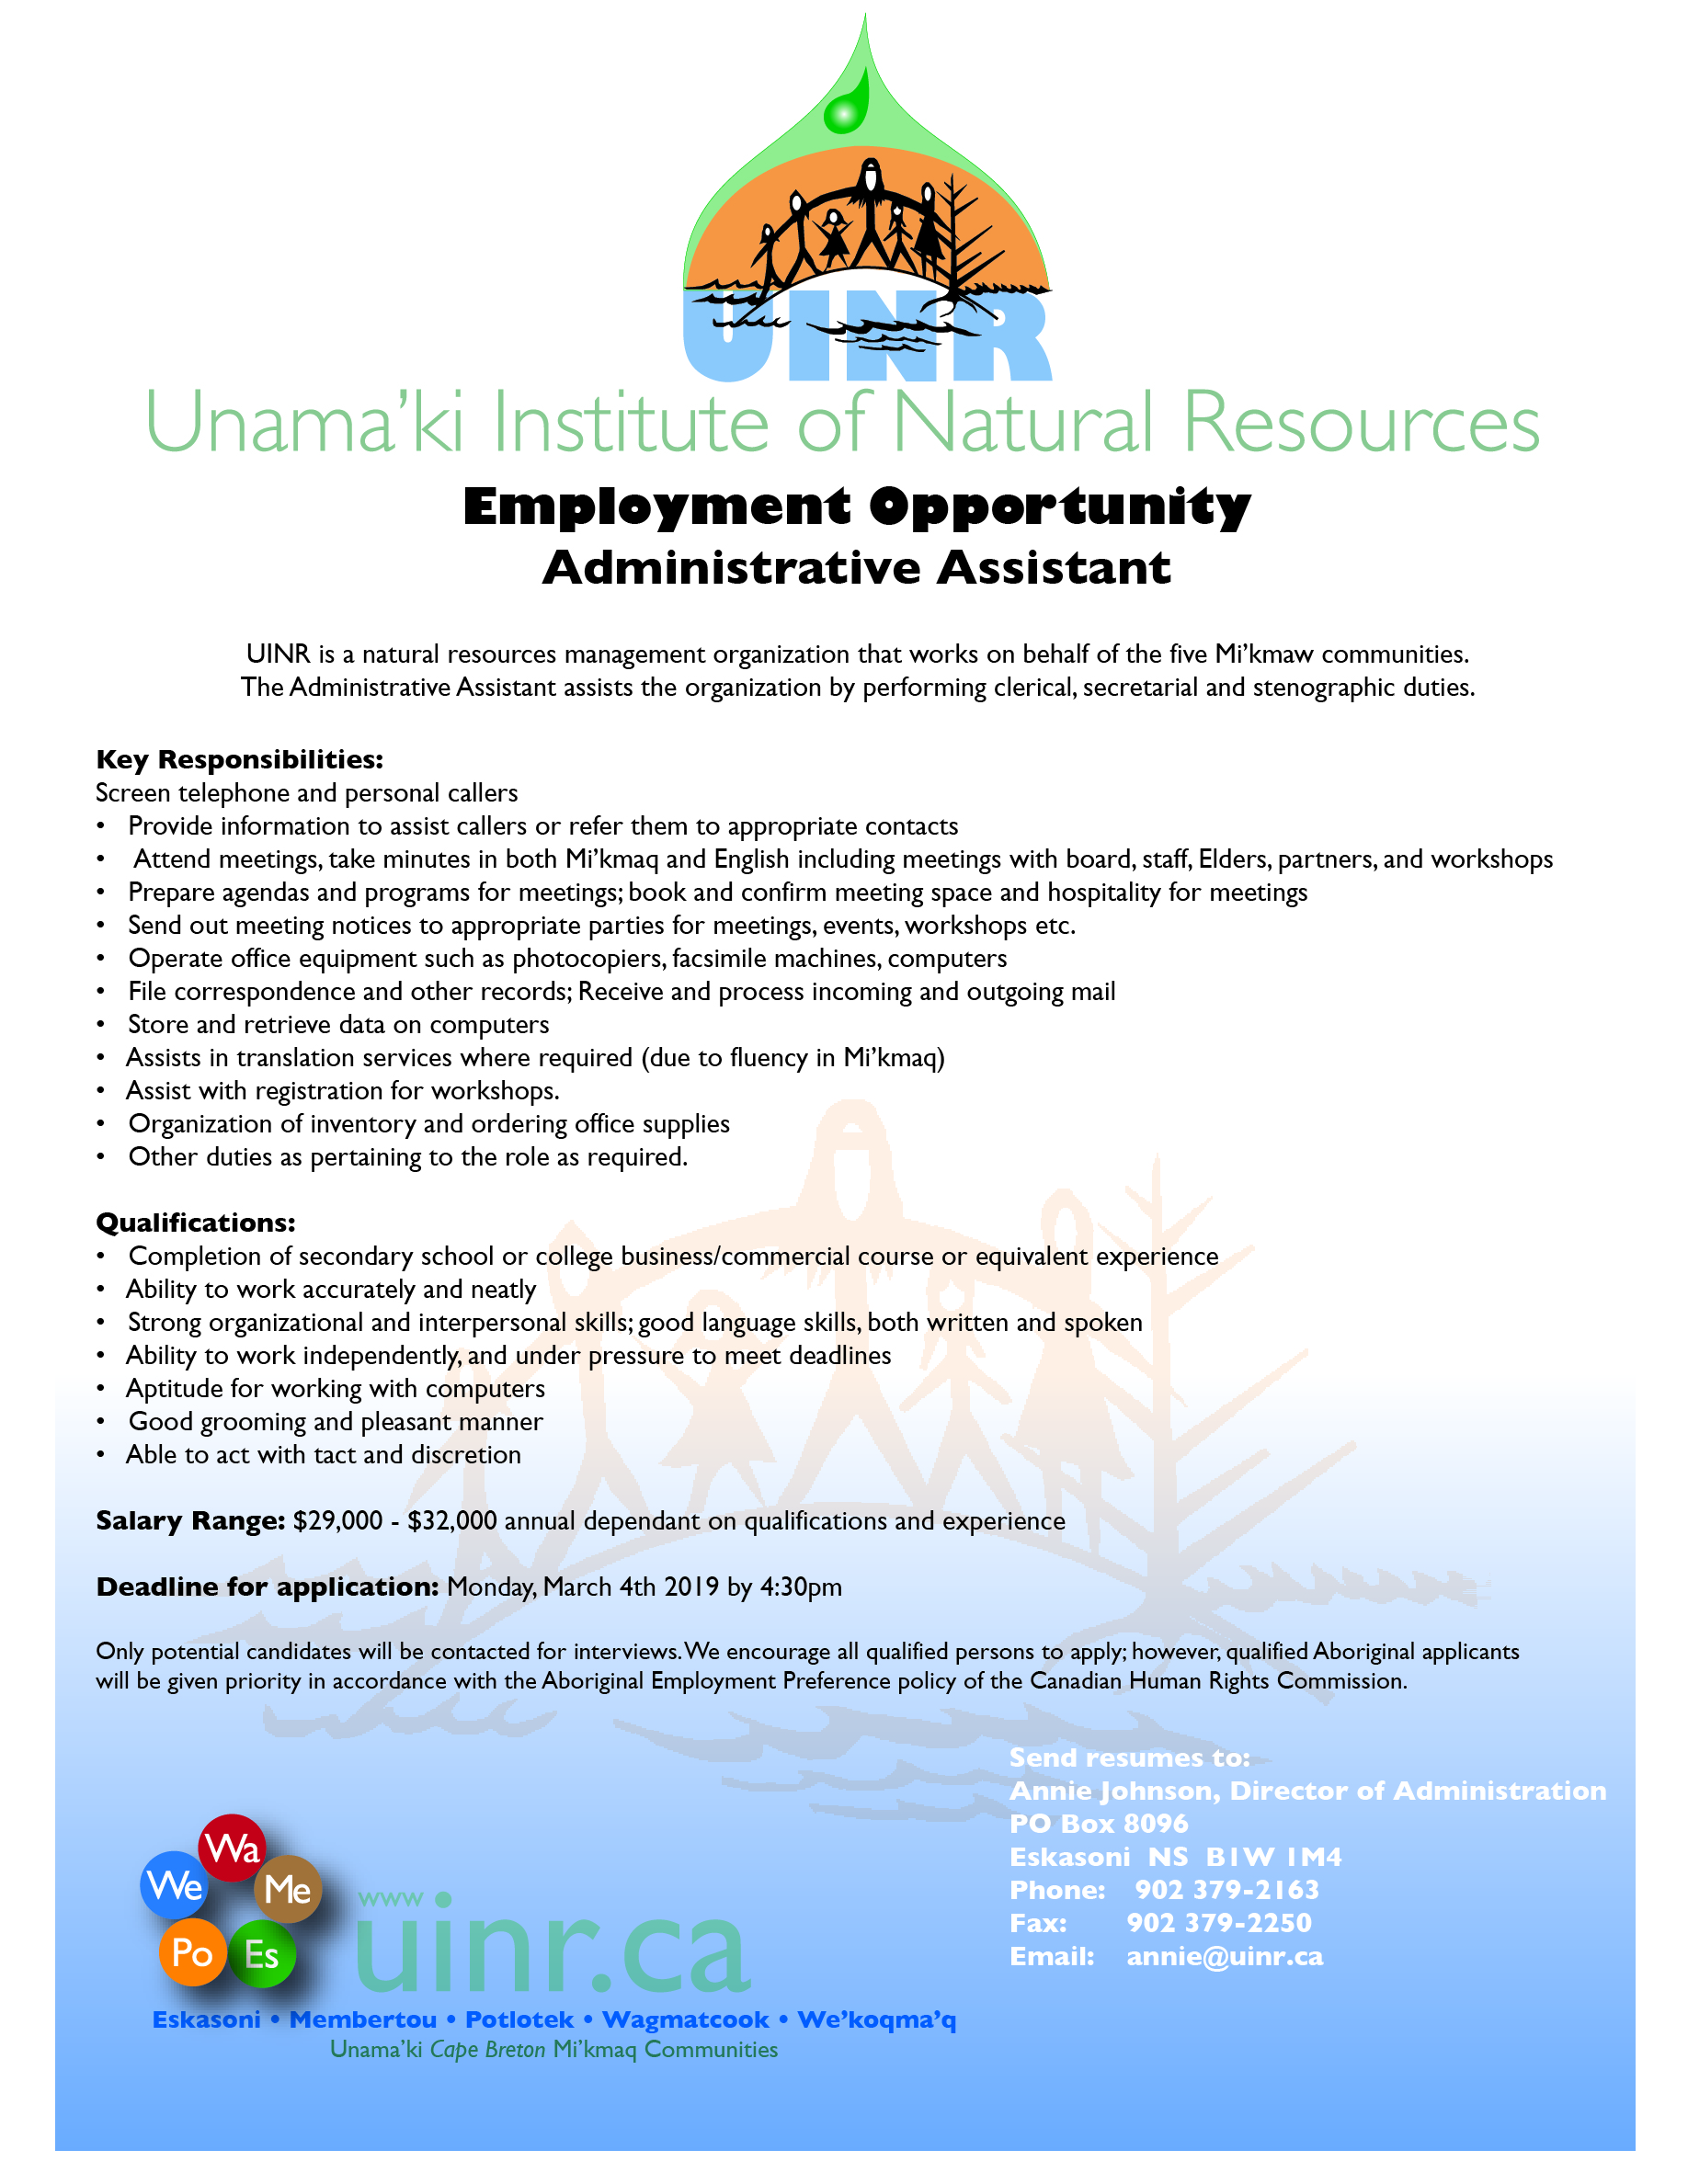 Employment Opportunity: Administrative Assistant